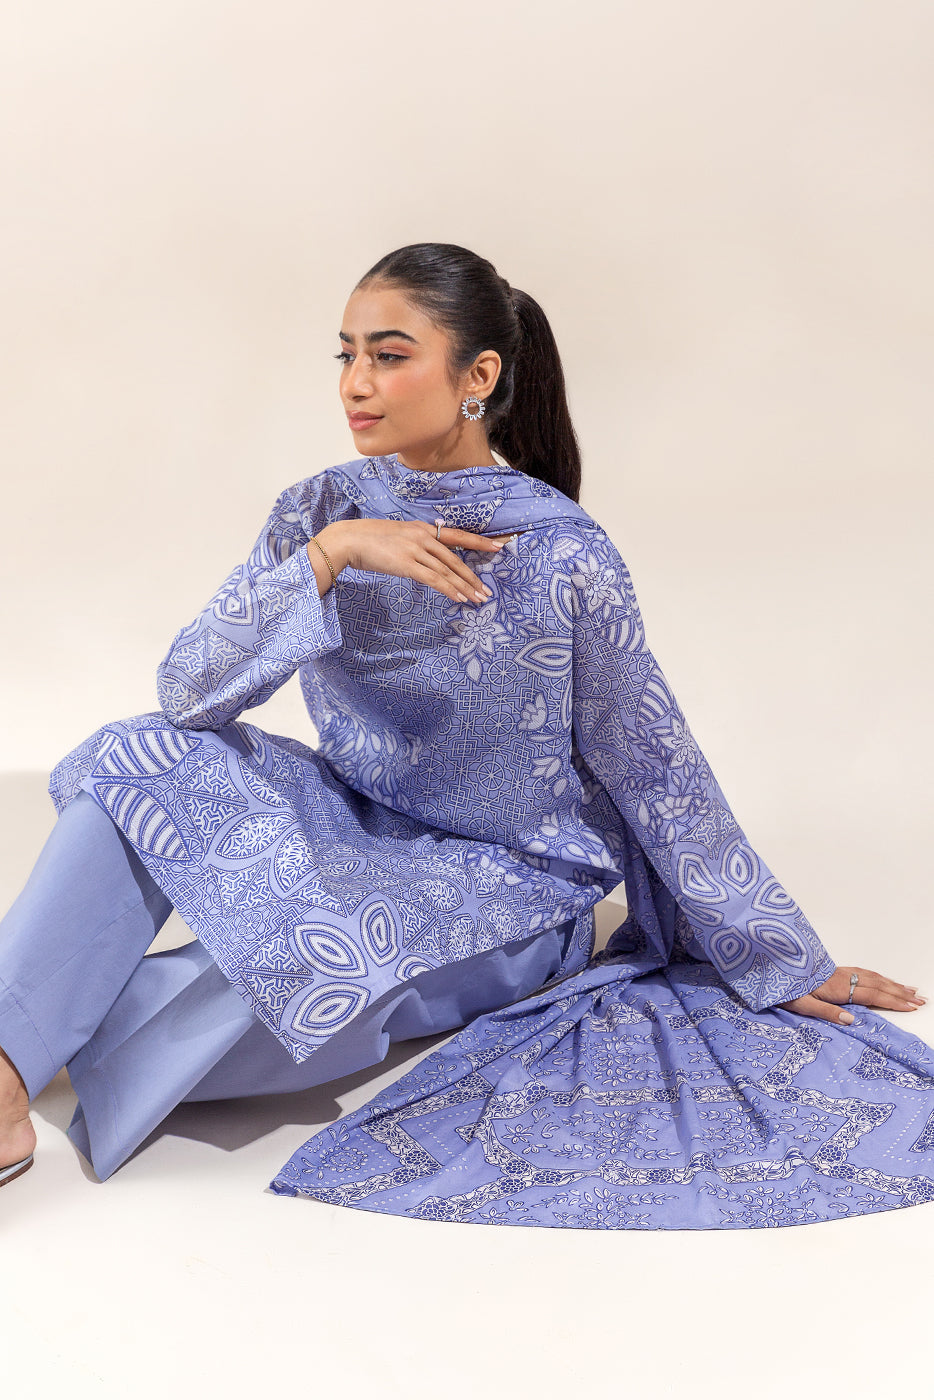 2 PIECE PRINTED LAWN SUIT-BLUE BLIZZARD (UNSTITCHED) - BEECHTREE